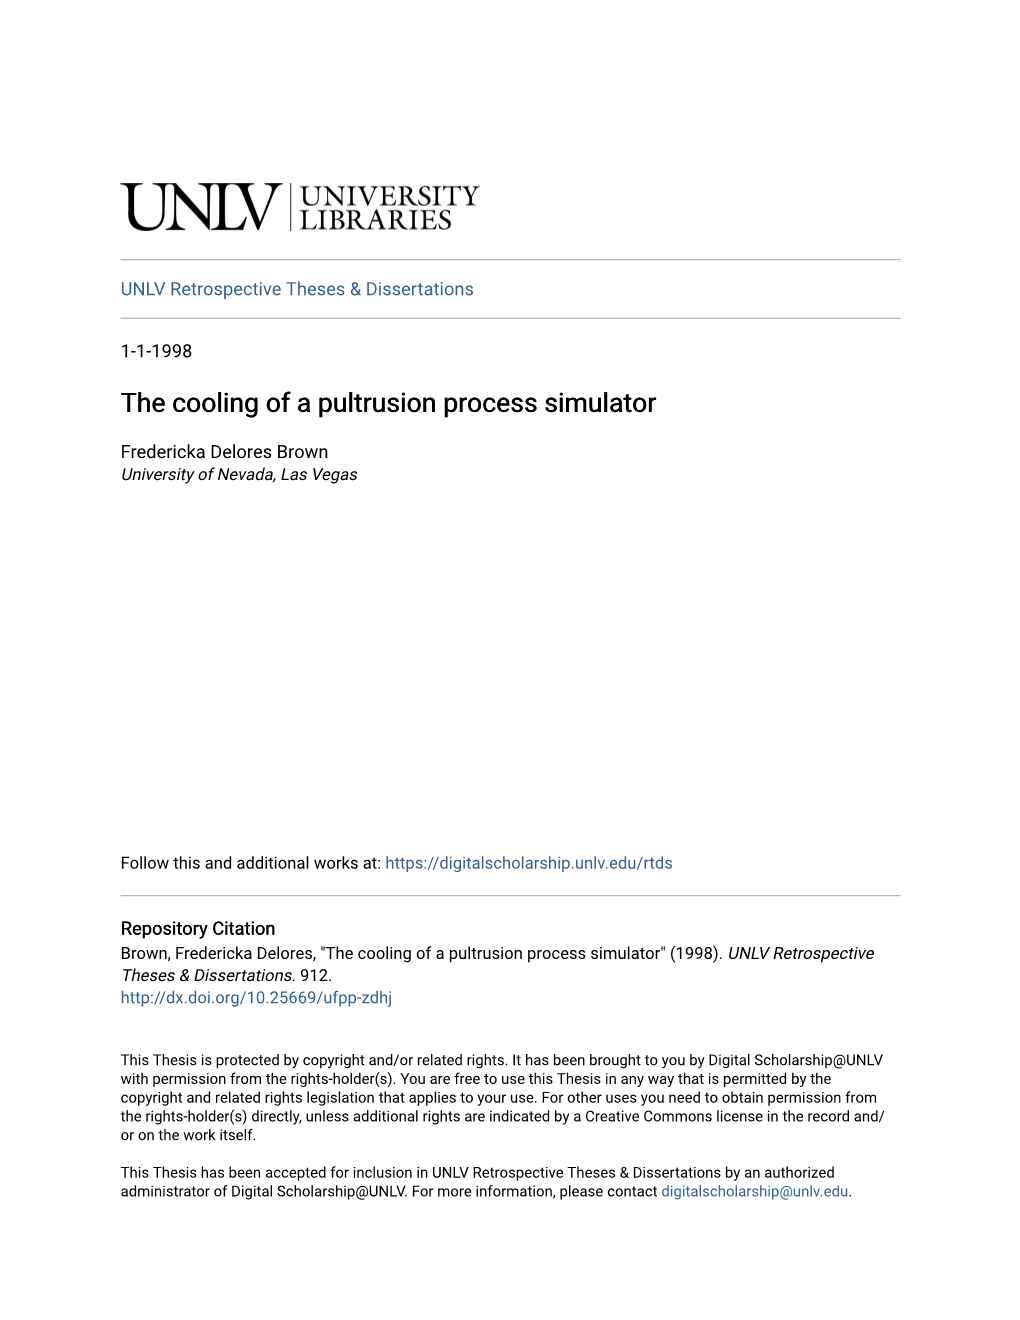 The Cooling of a Pultrusion Process Simulator